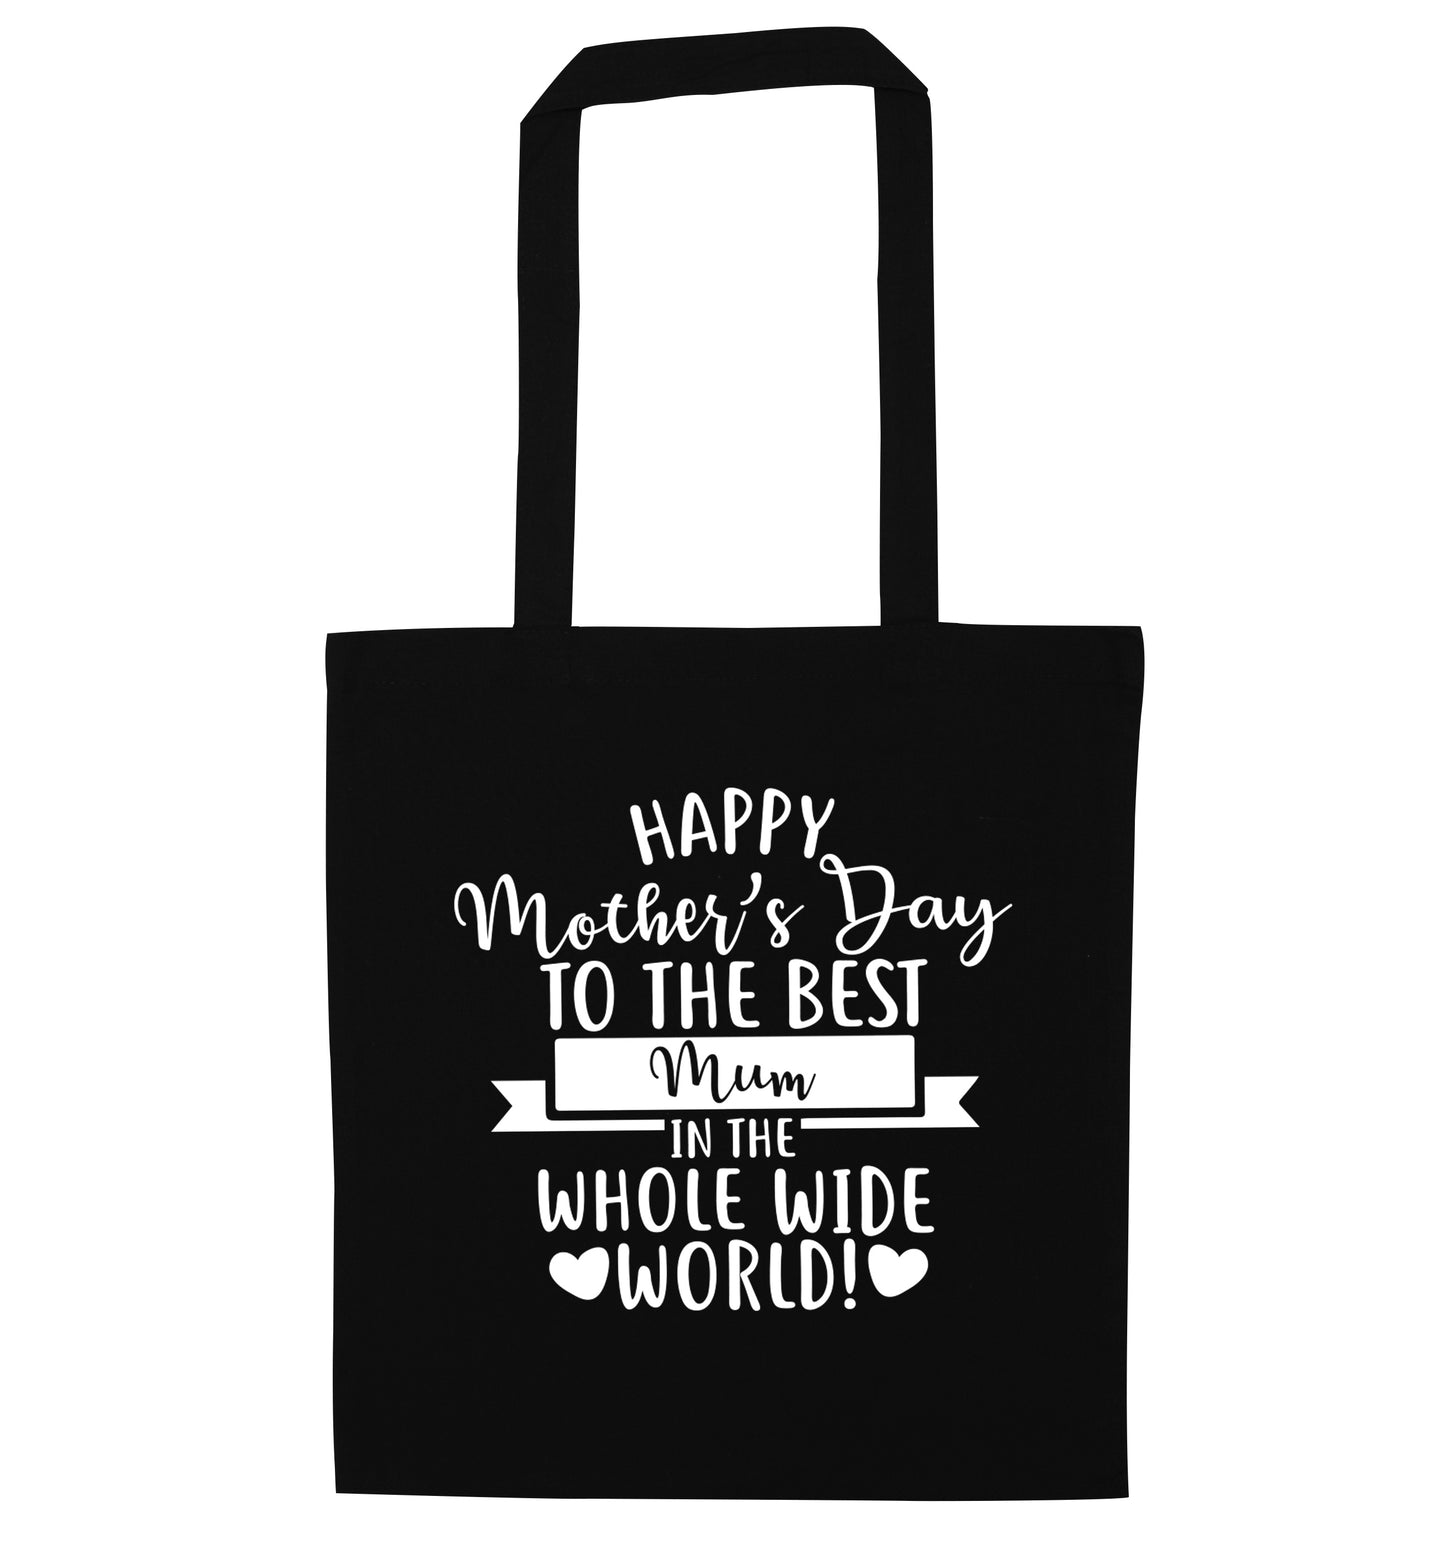 Happy Mother's Day to the best mum in the whole wide world! black tote bag